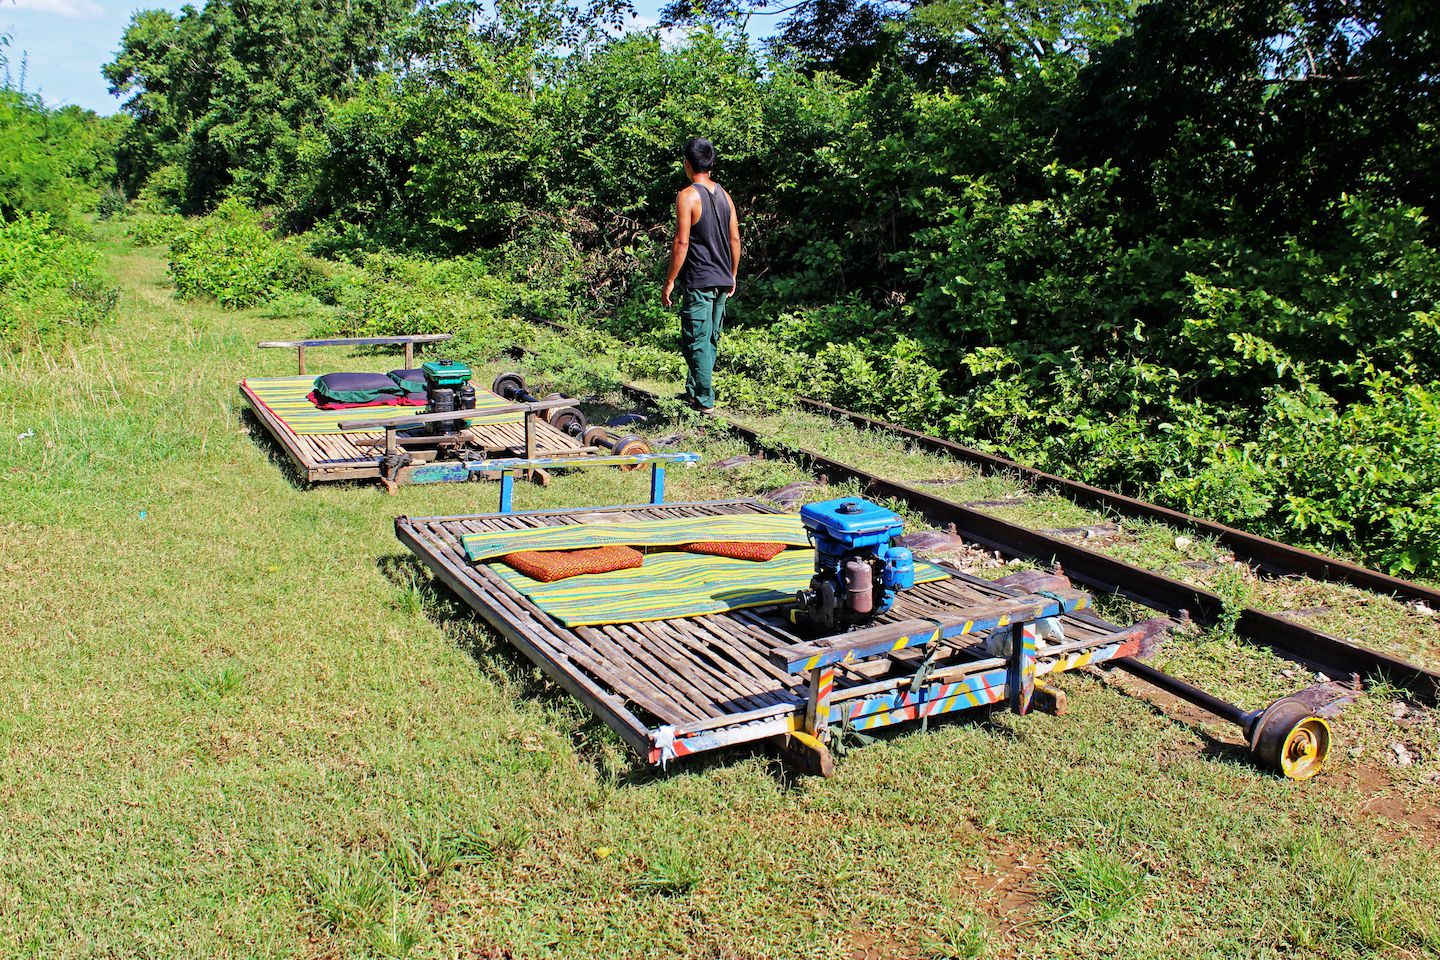 Bamboo trains disassembled on the side of the track